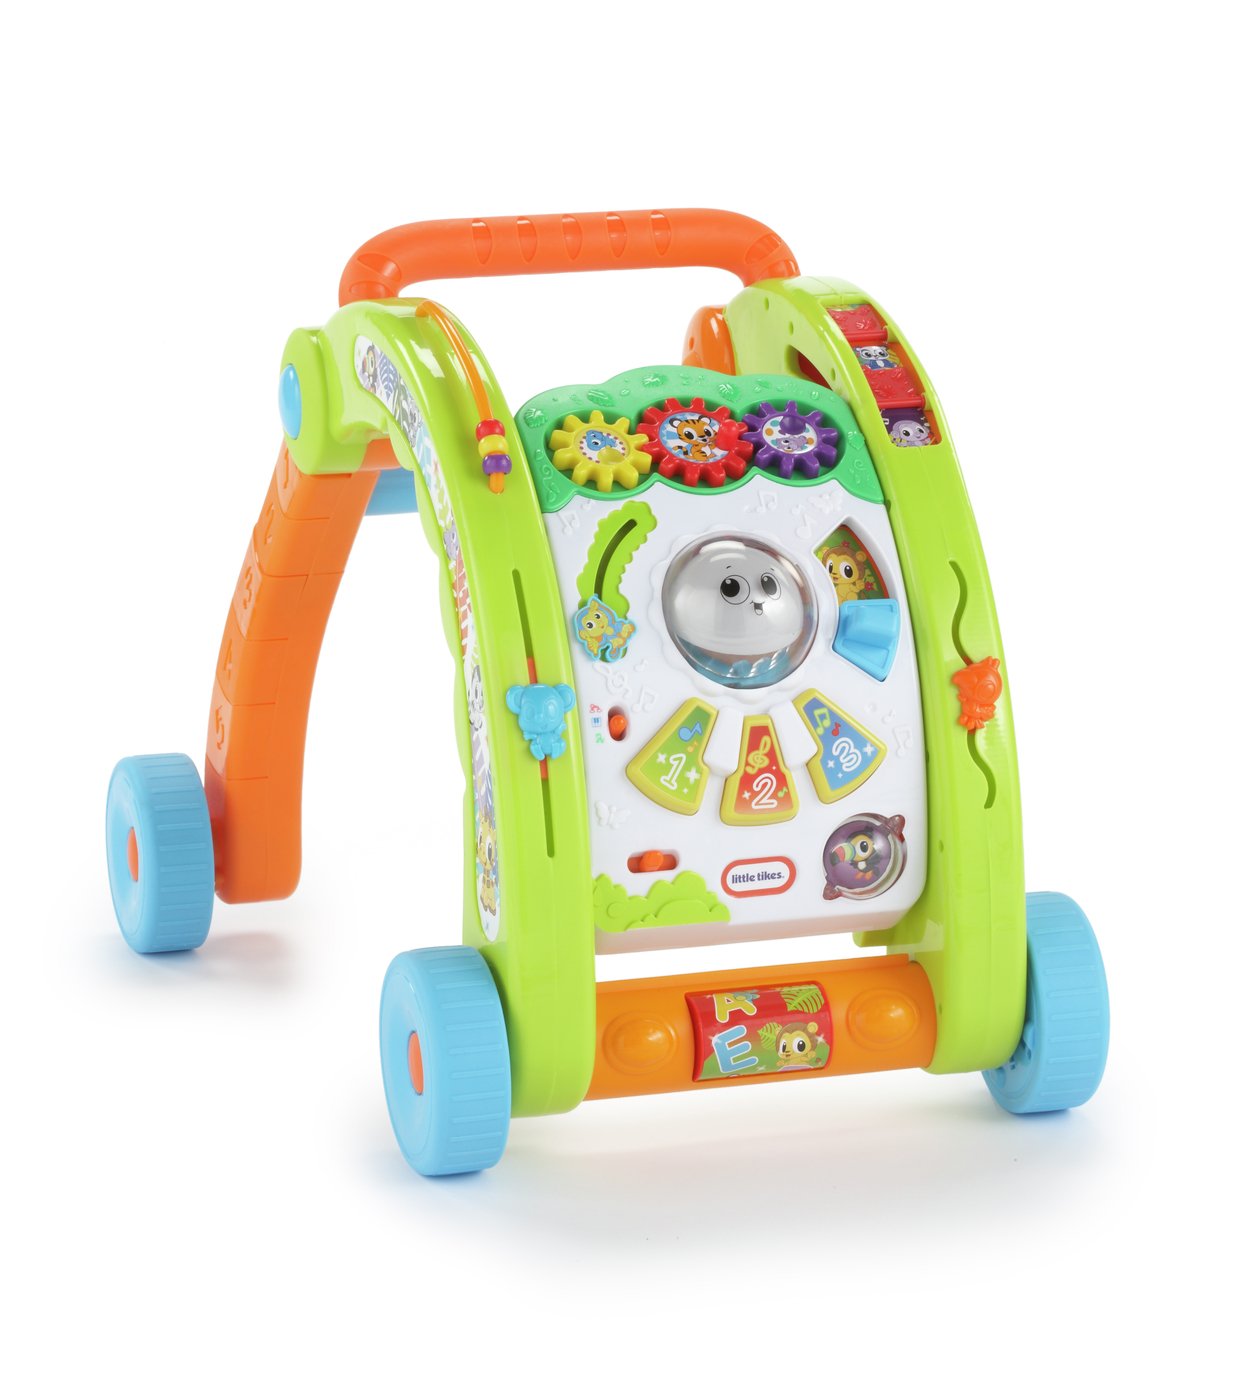 Little Tikes Fantastic Firsts 3-in-1 Activity Walker